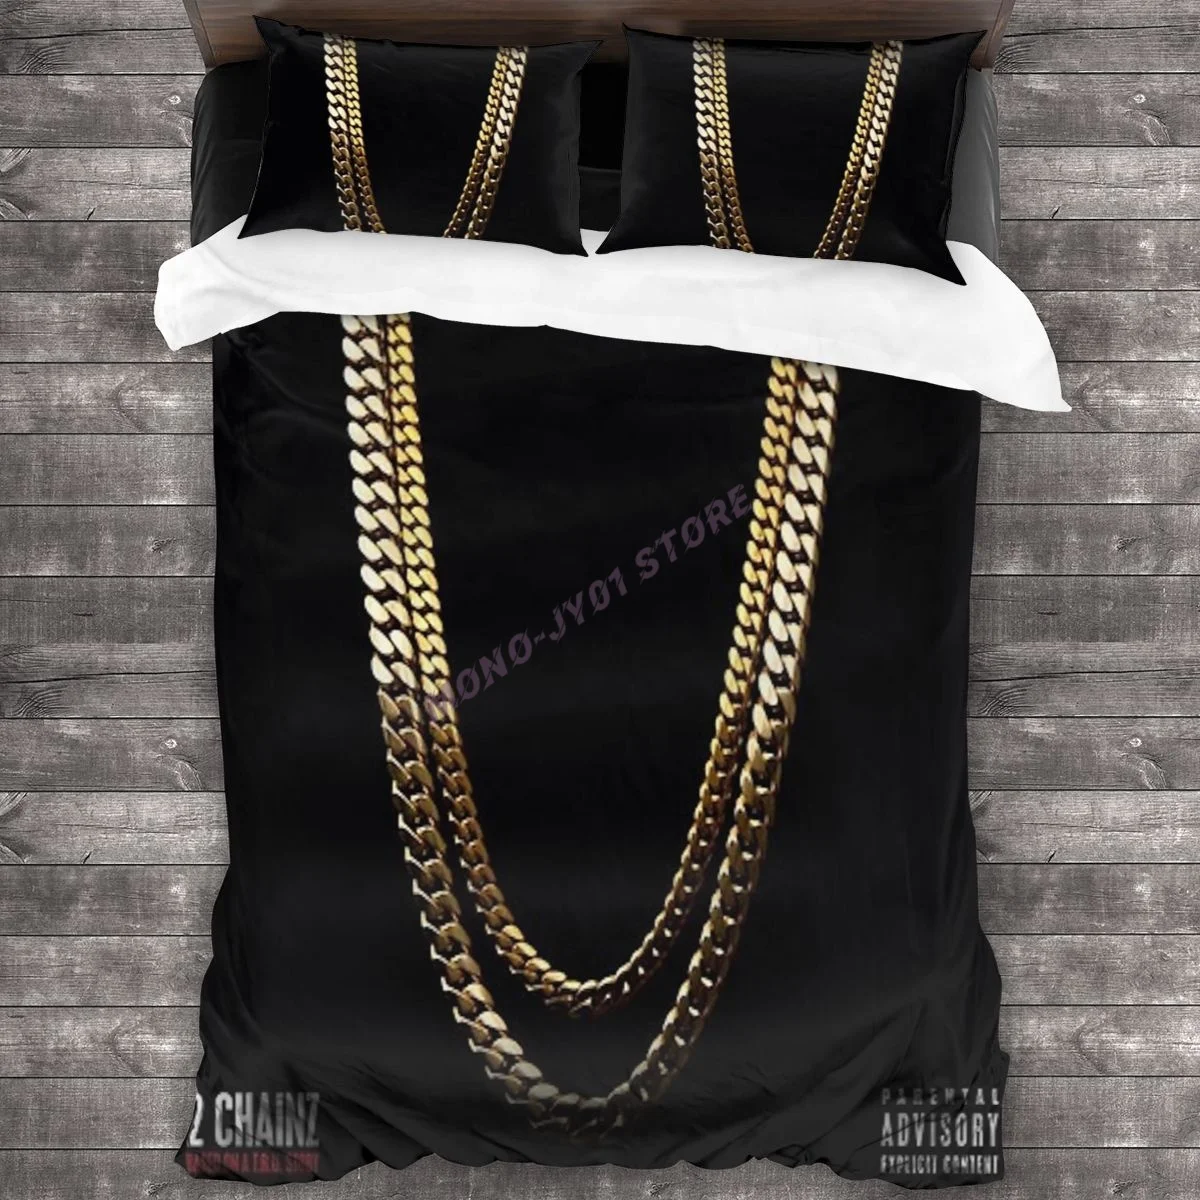 

2 Chainz Based On A T.R.U Story Bedding Set Duvet Cover Pillowcases Comforter Bedding Sets Bedclothes